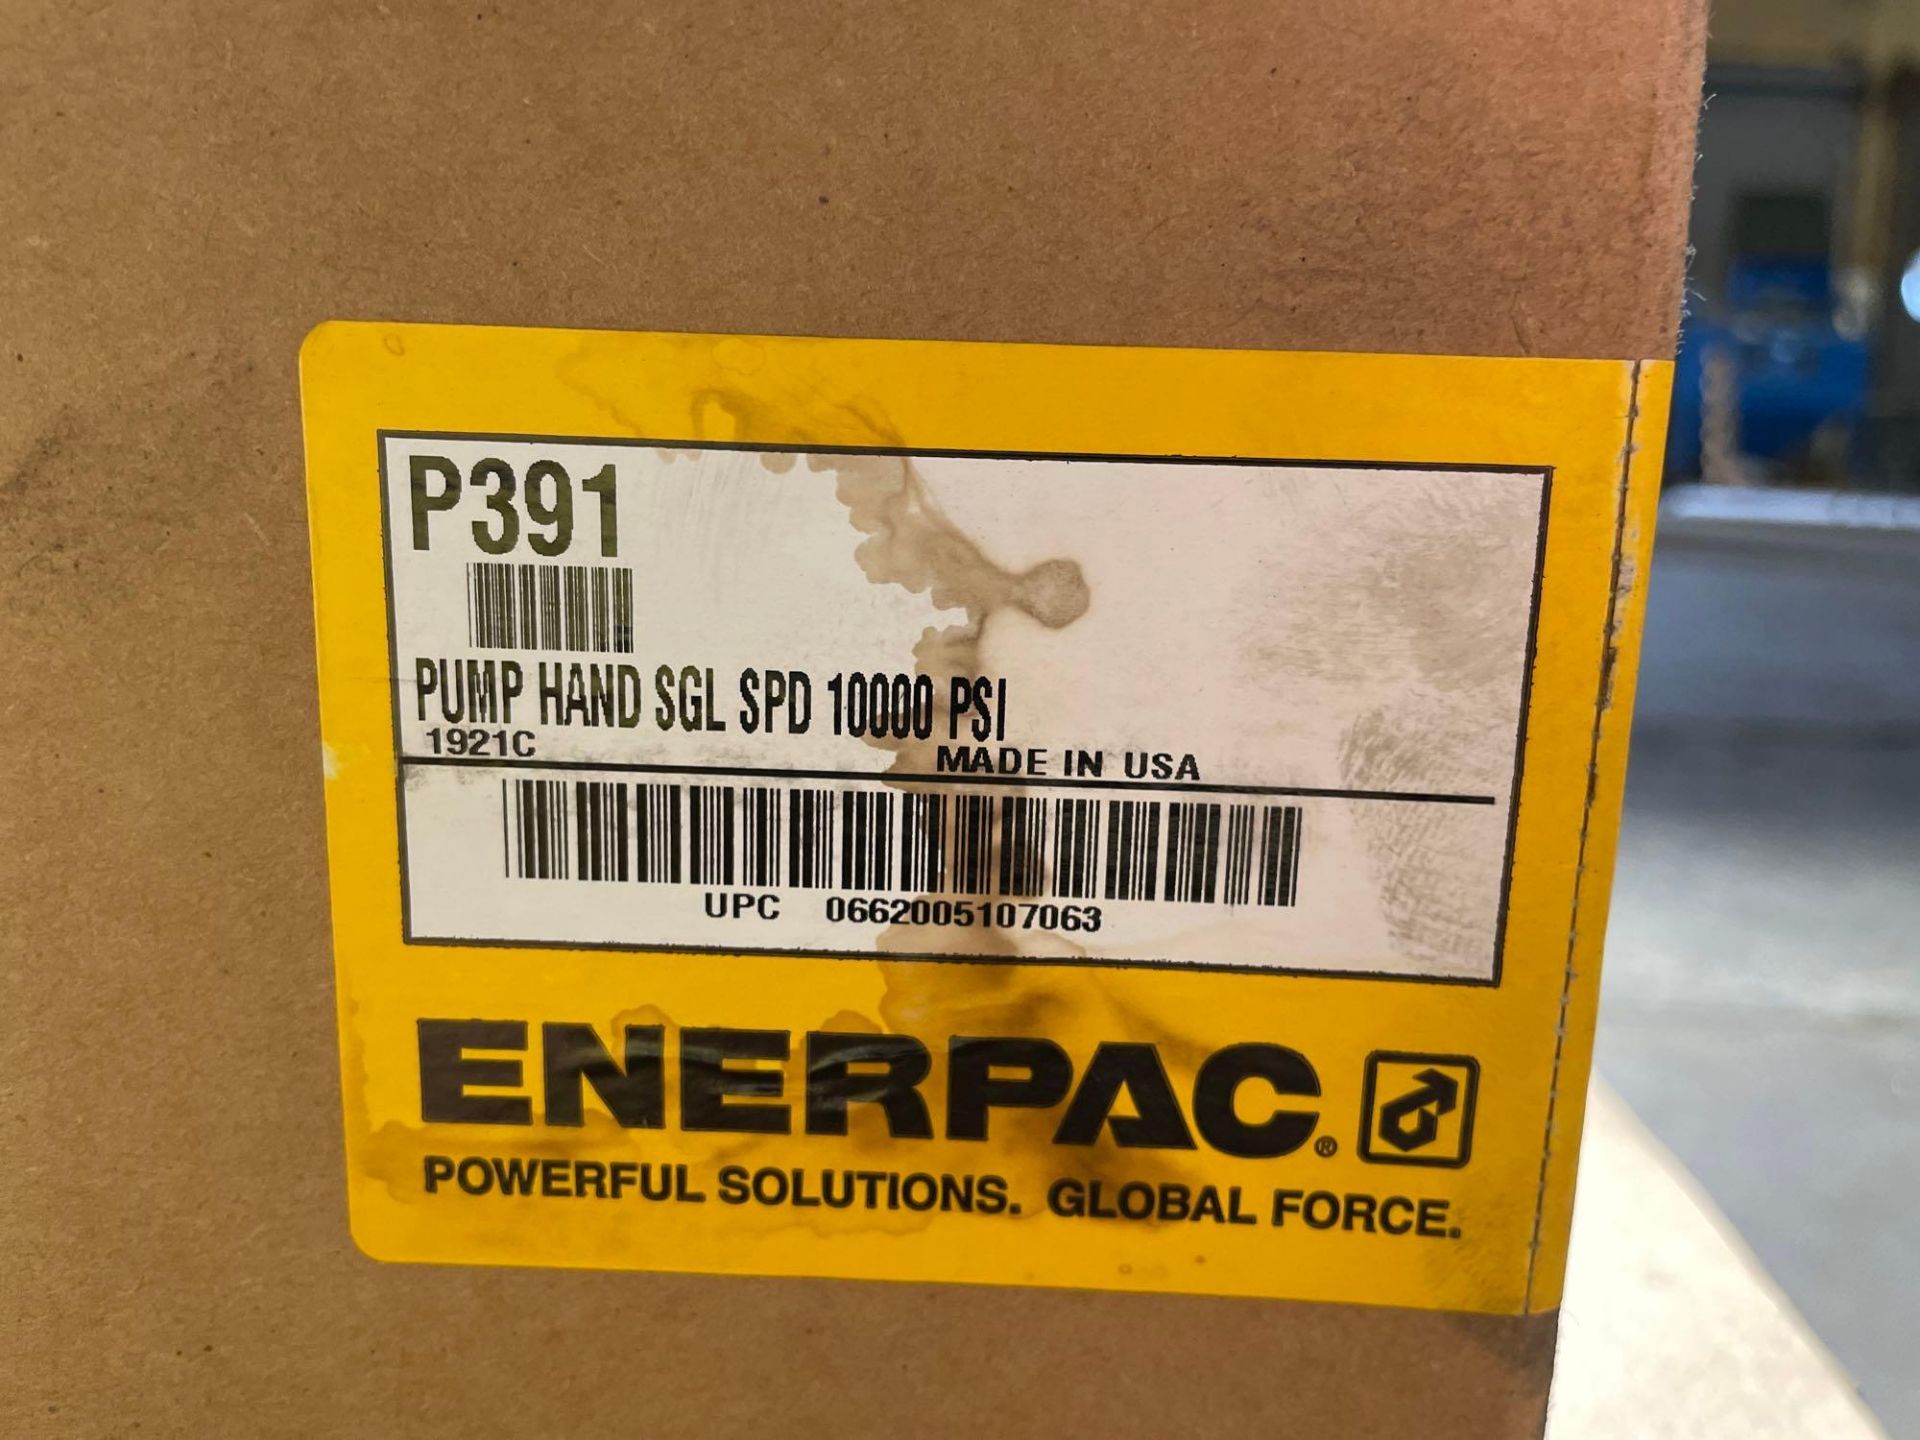 New in Box Enerpac Pump Hand Model P391 - Image 5 of 6